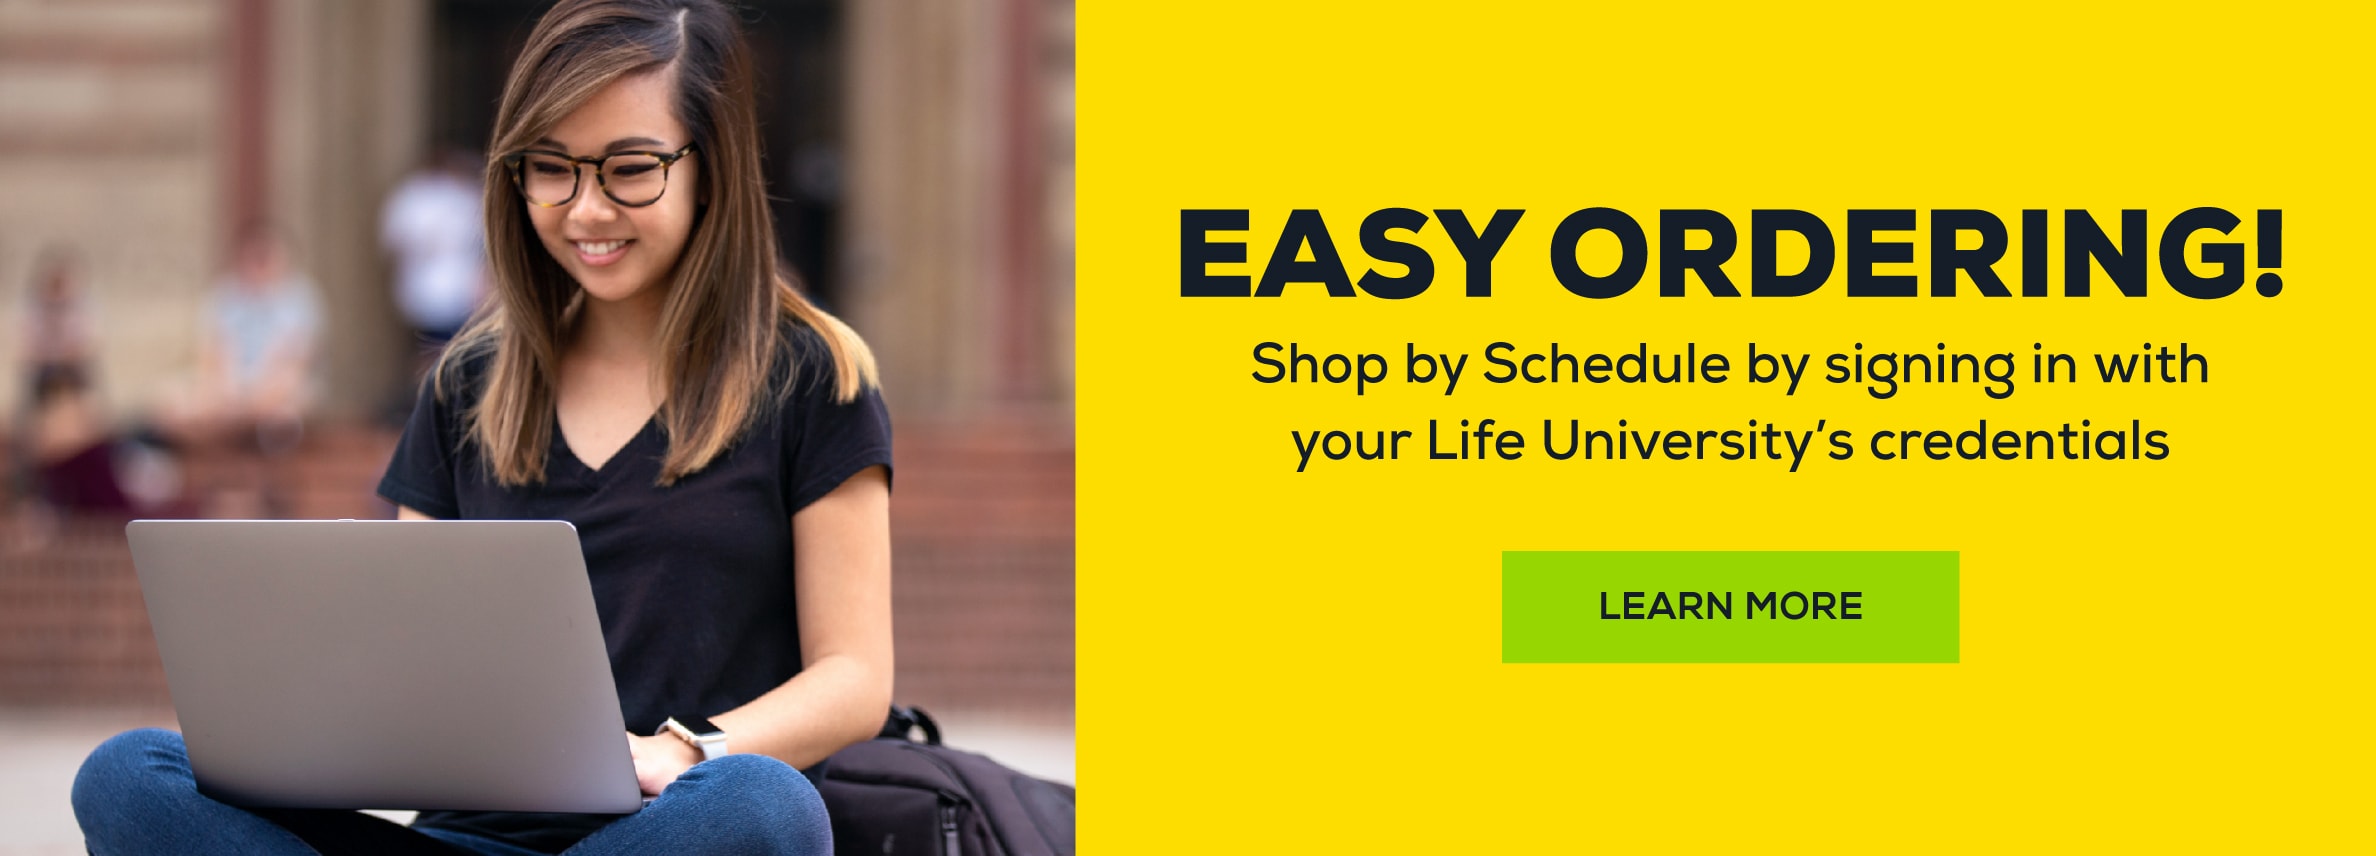 Easy Ordering. Shop by Schedule by signing in with your Life UniversityÃ¢â‚¬â„¢s credentials. Learn More (new tab)